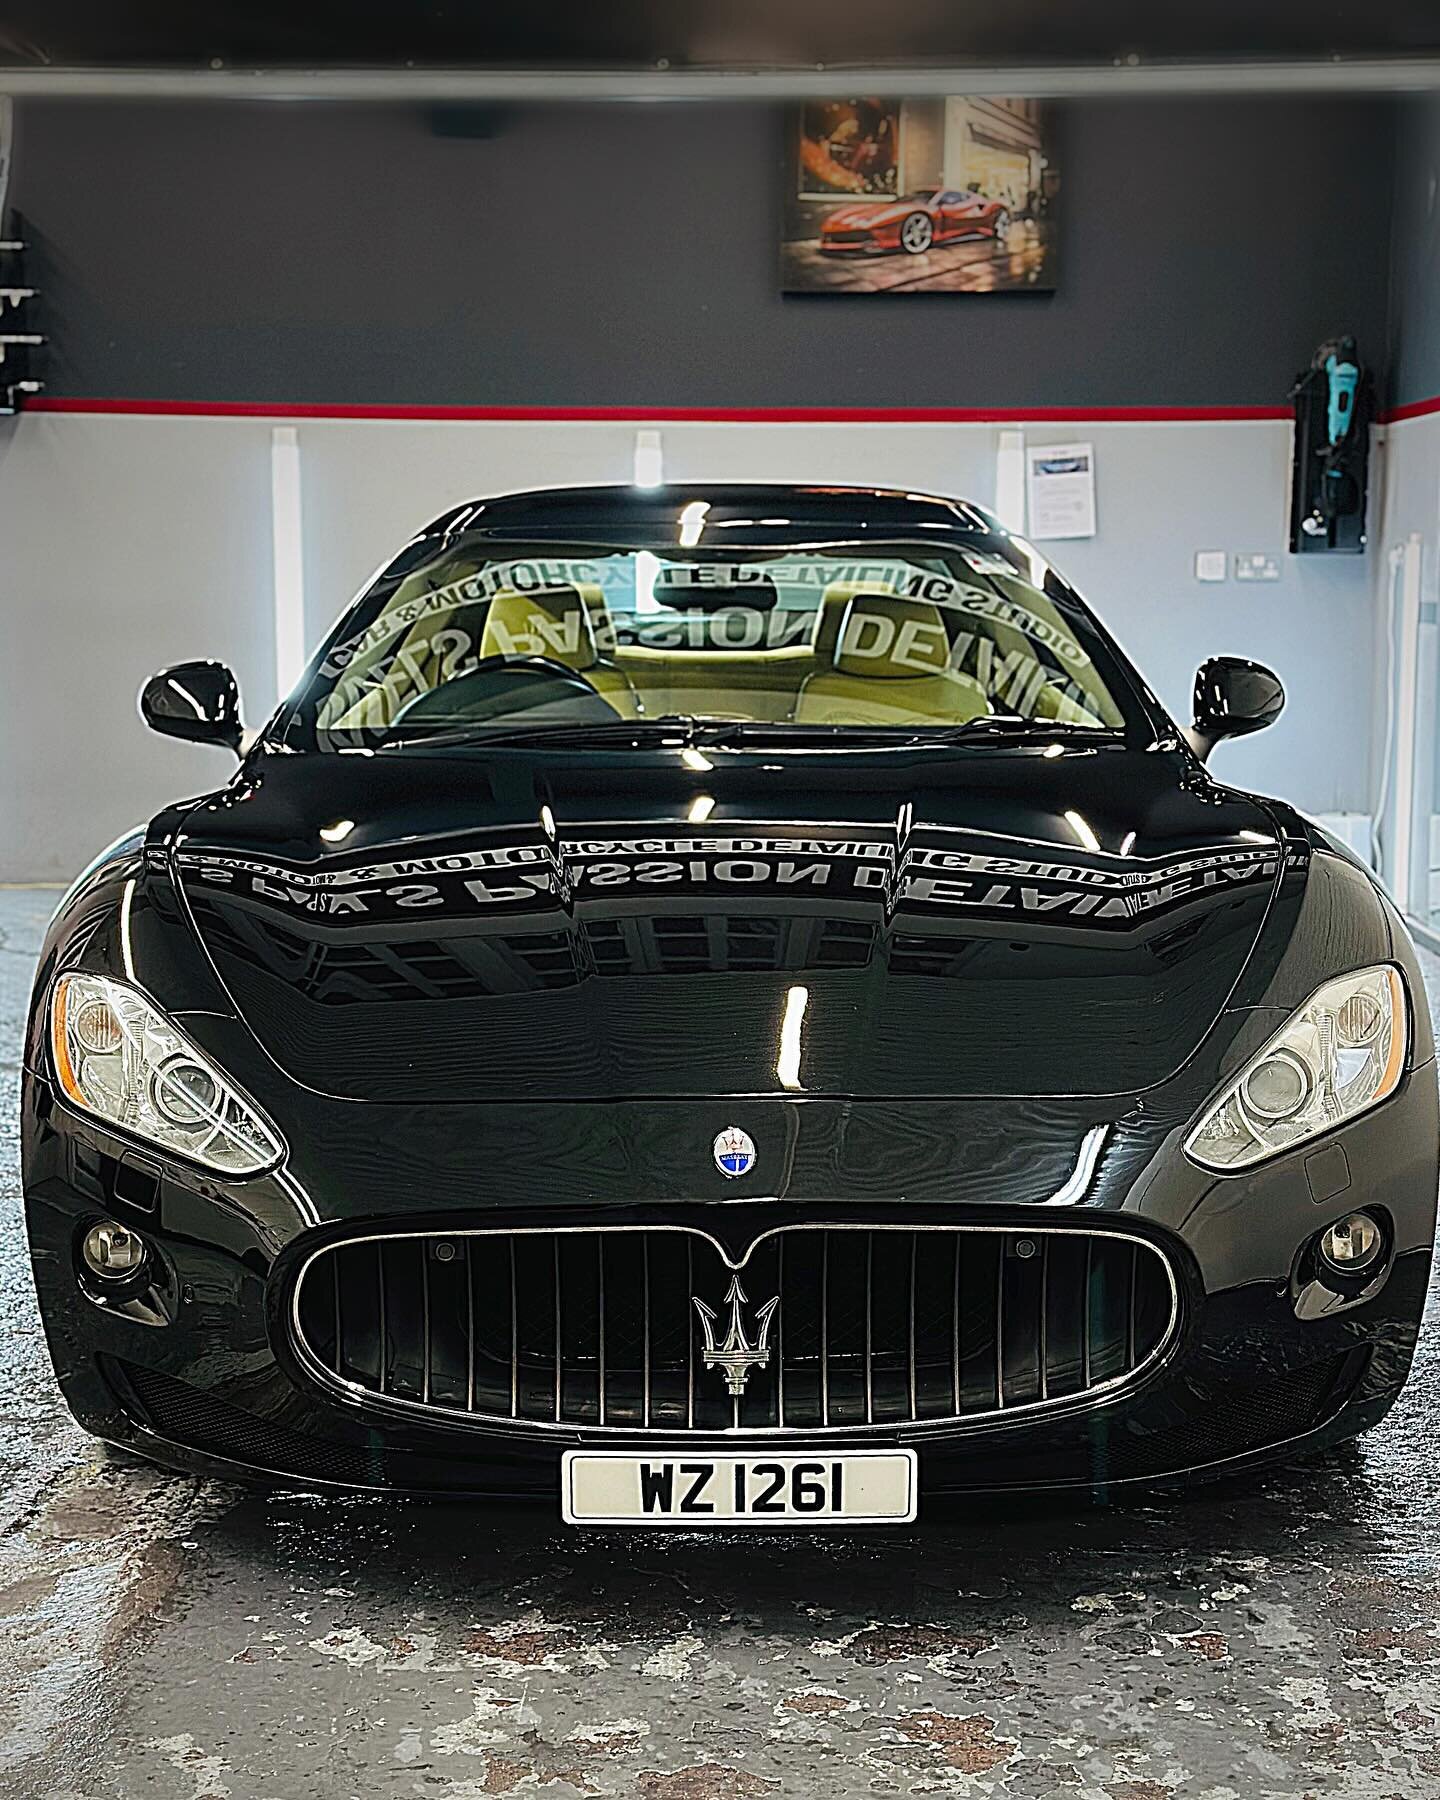 JEWELS PASSION DETAILING: Car Valet, Polishing & Paint Protection